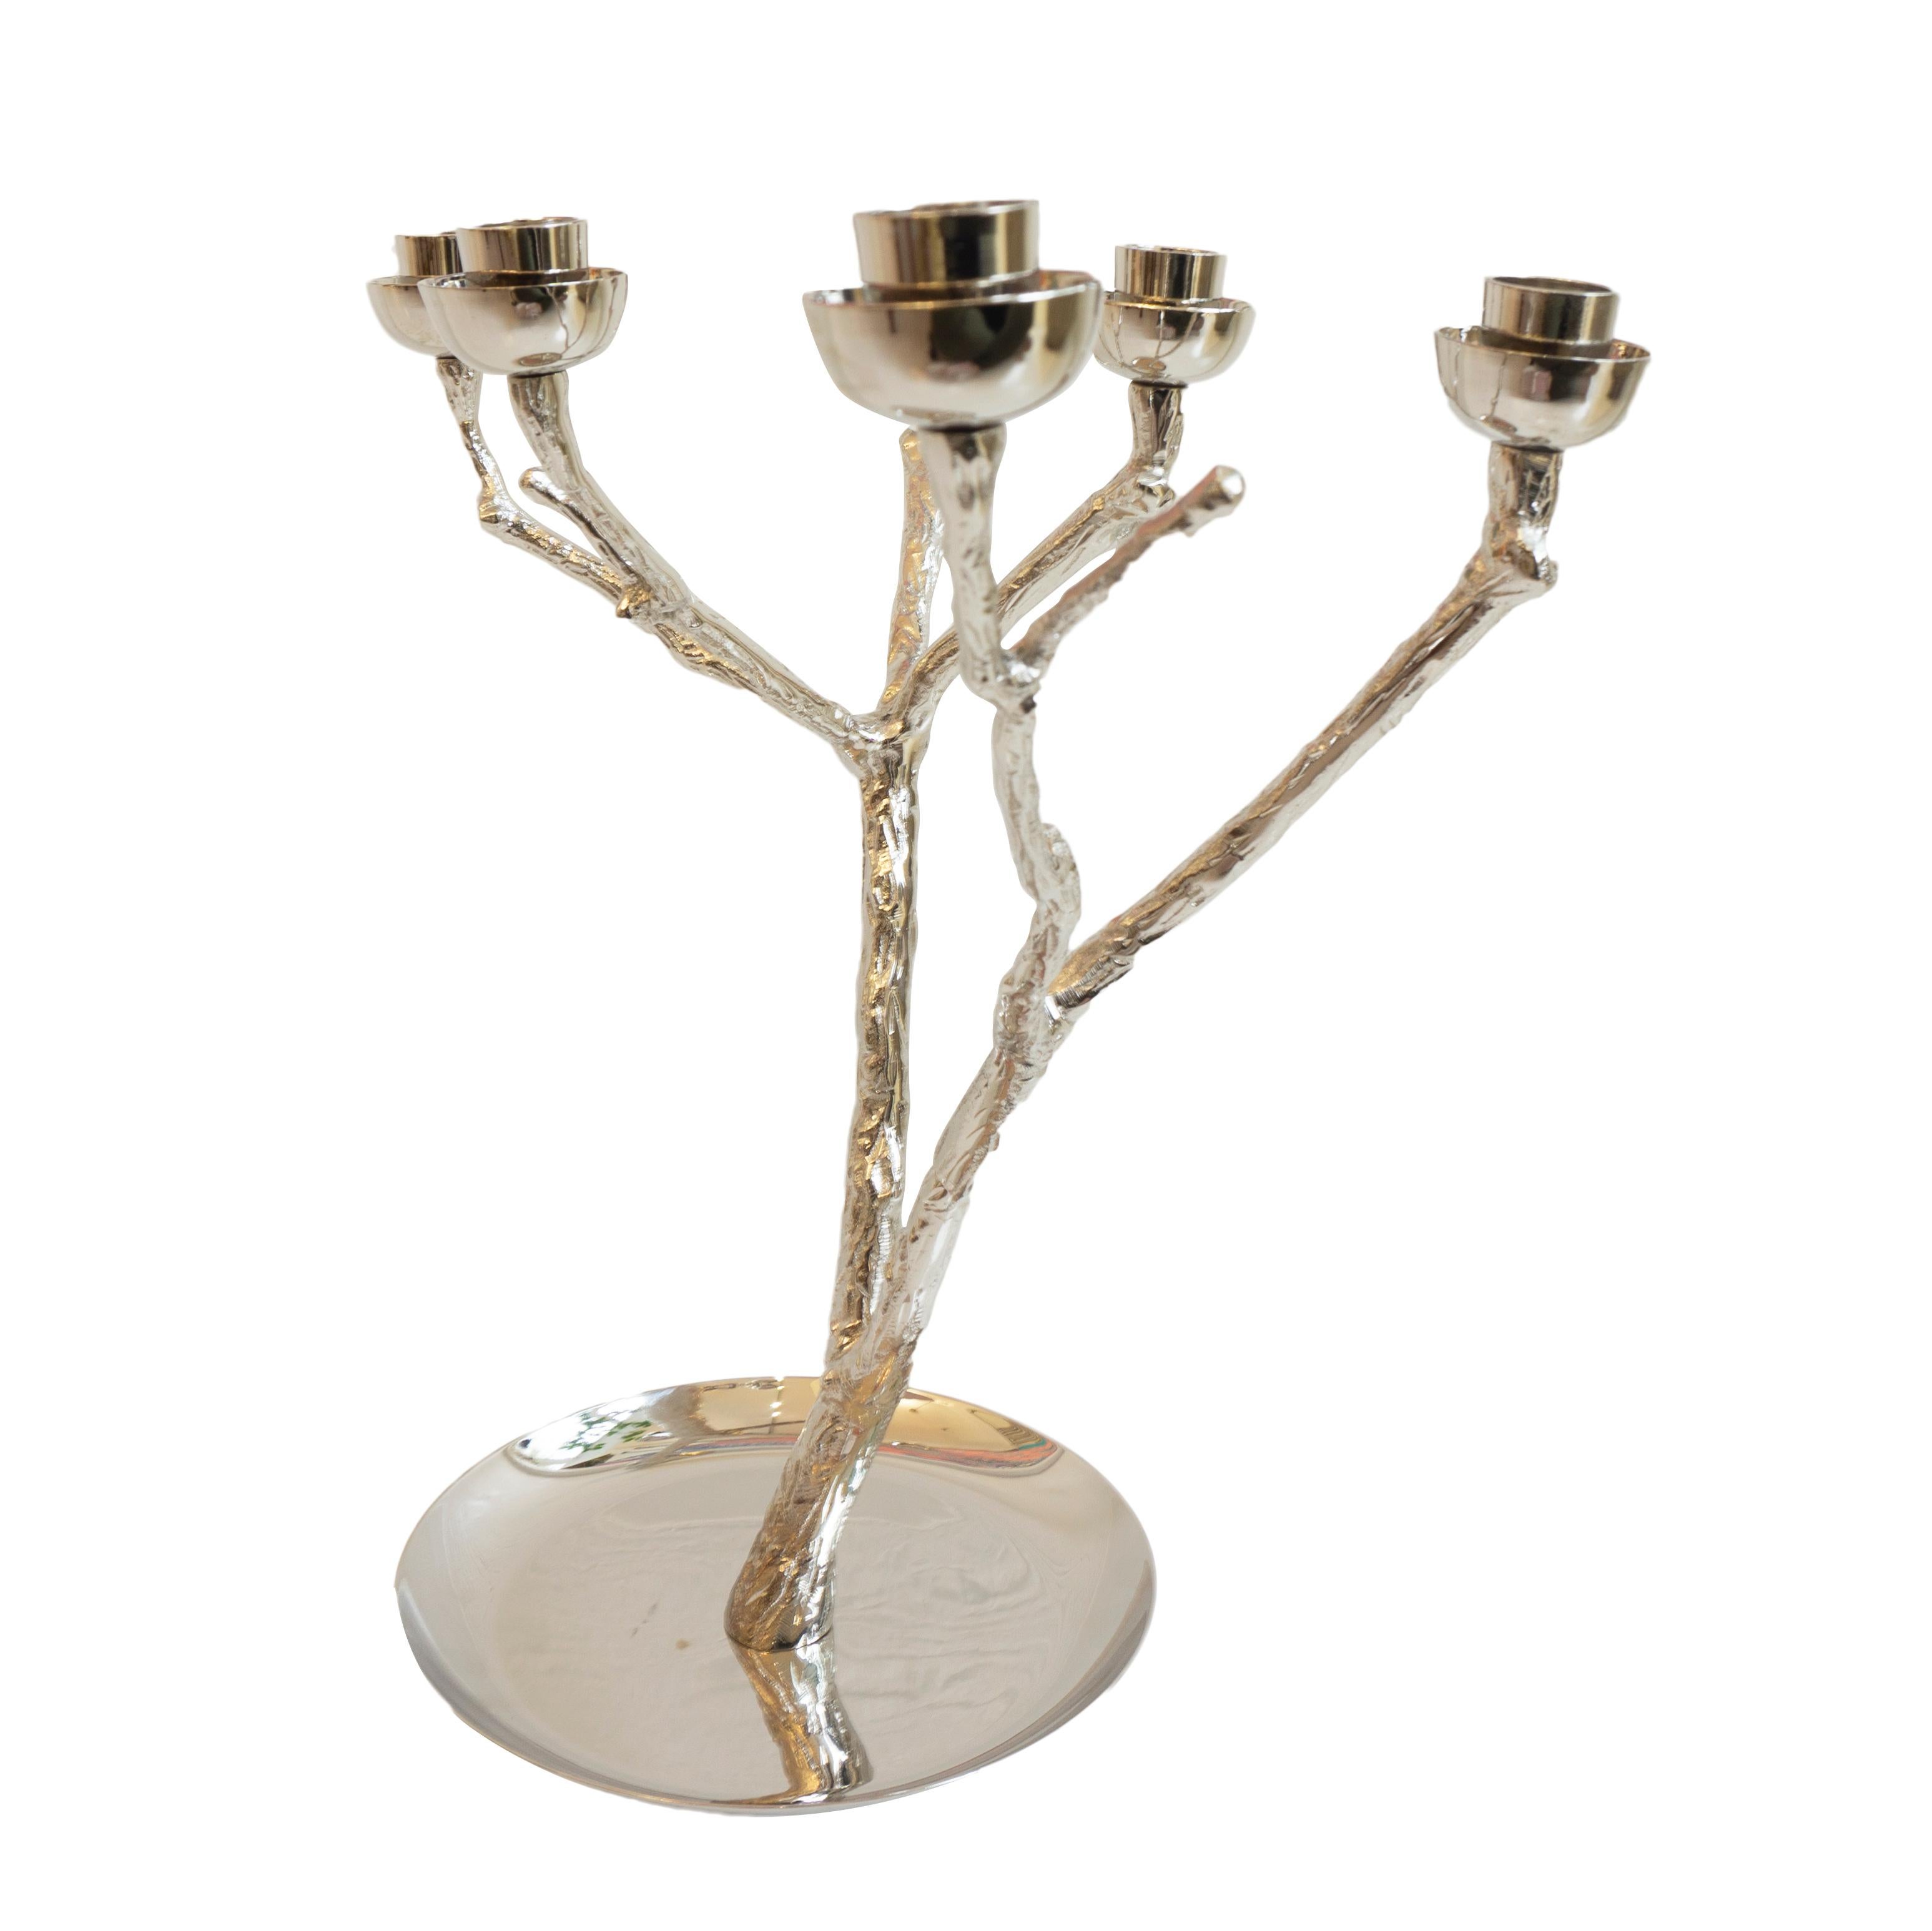 A metal candleholder in the shape of a branch with nickel plated finish. Holds six tapered candles. A great center piece. Handcrafted and designed from the Netherlands.

Measurements: 14” H x 16” W.